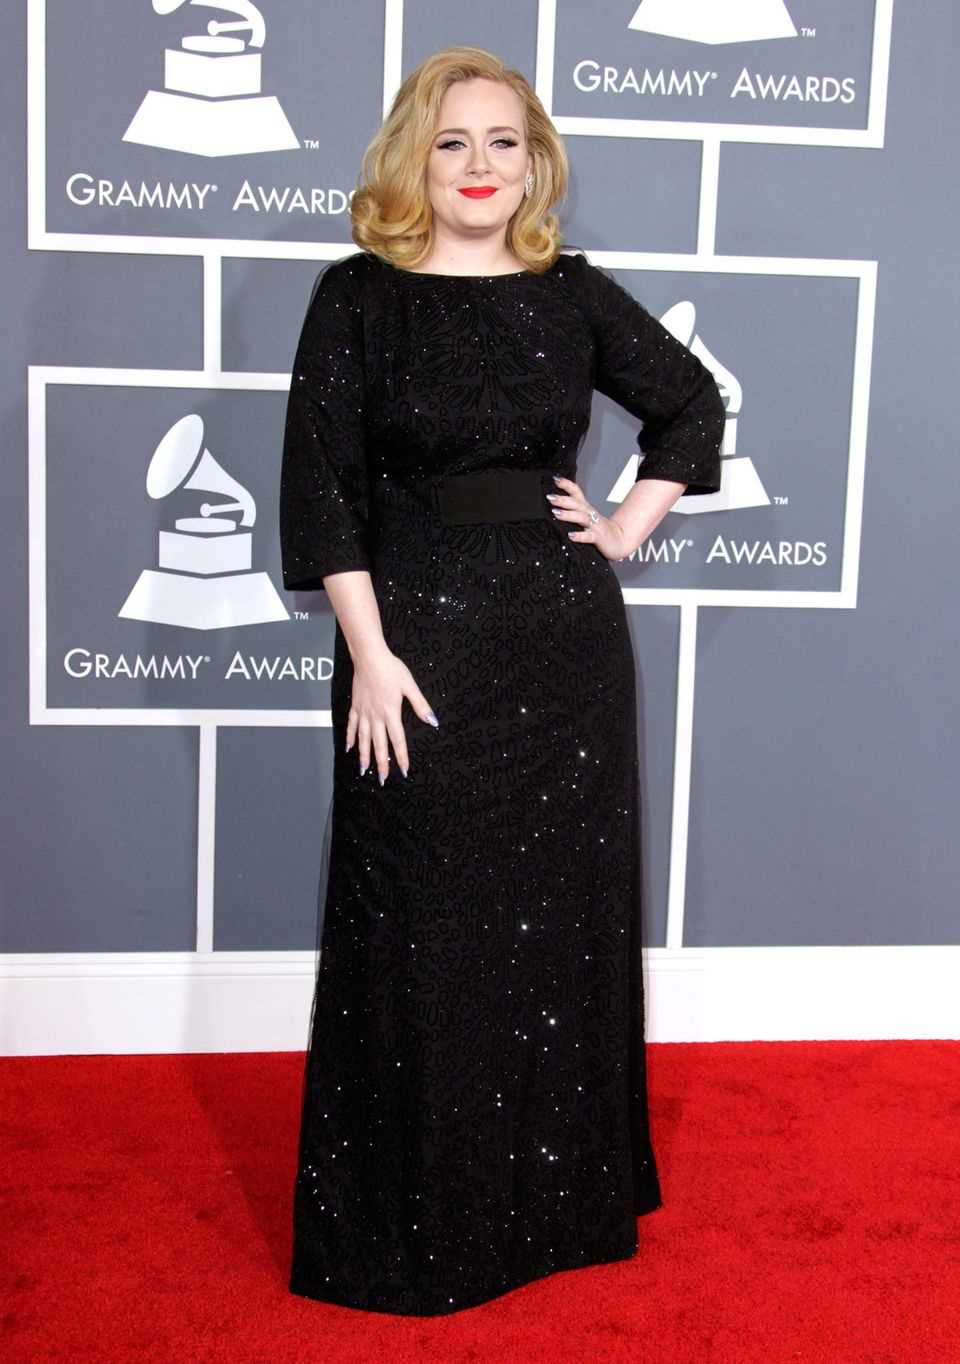 Adele at the Grammys in 2012.